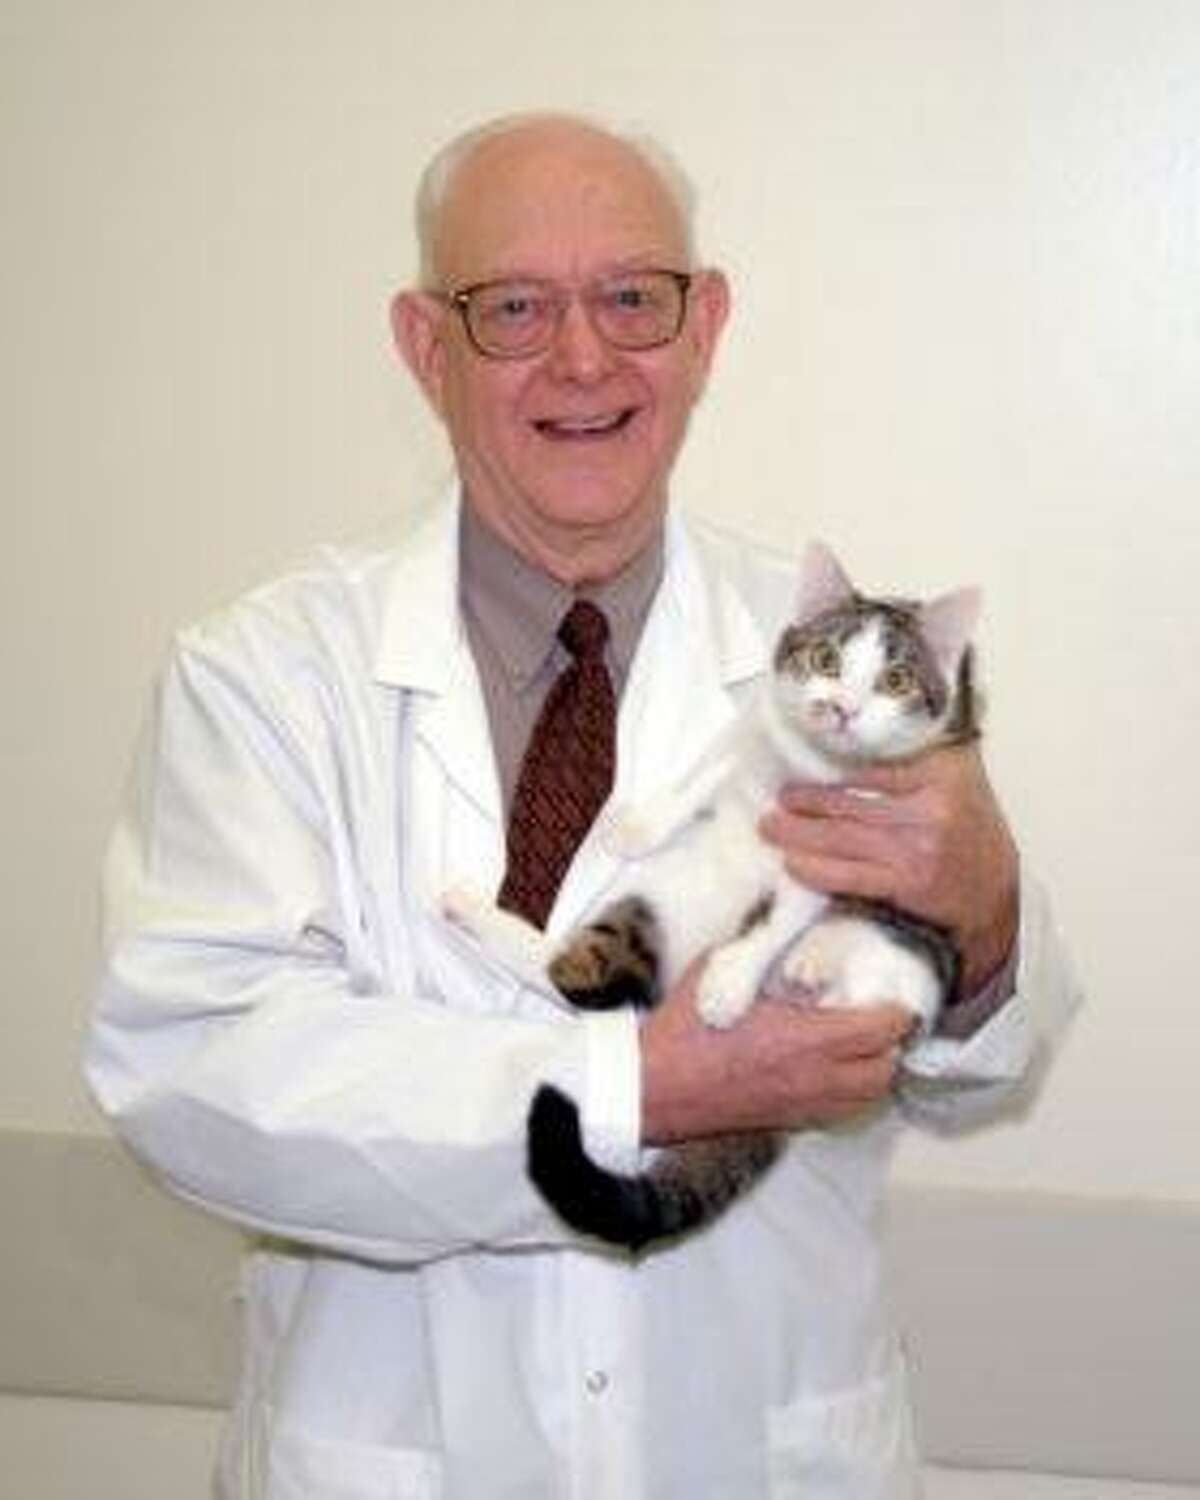 Copy Cat was adopted at six months old by Dr. Duane Kraemer, a senior professor in Reproduction Sciences Laboratory, and his wife, Shirley, six months after her birth.